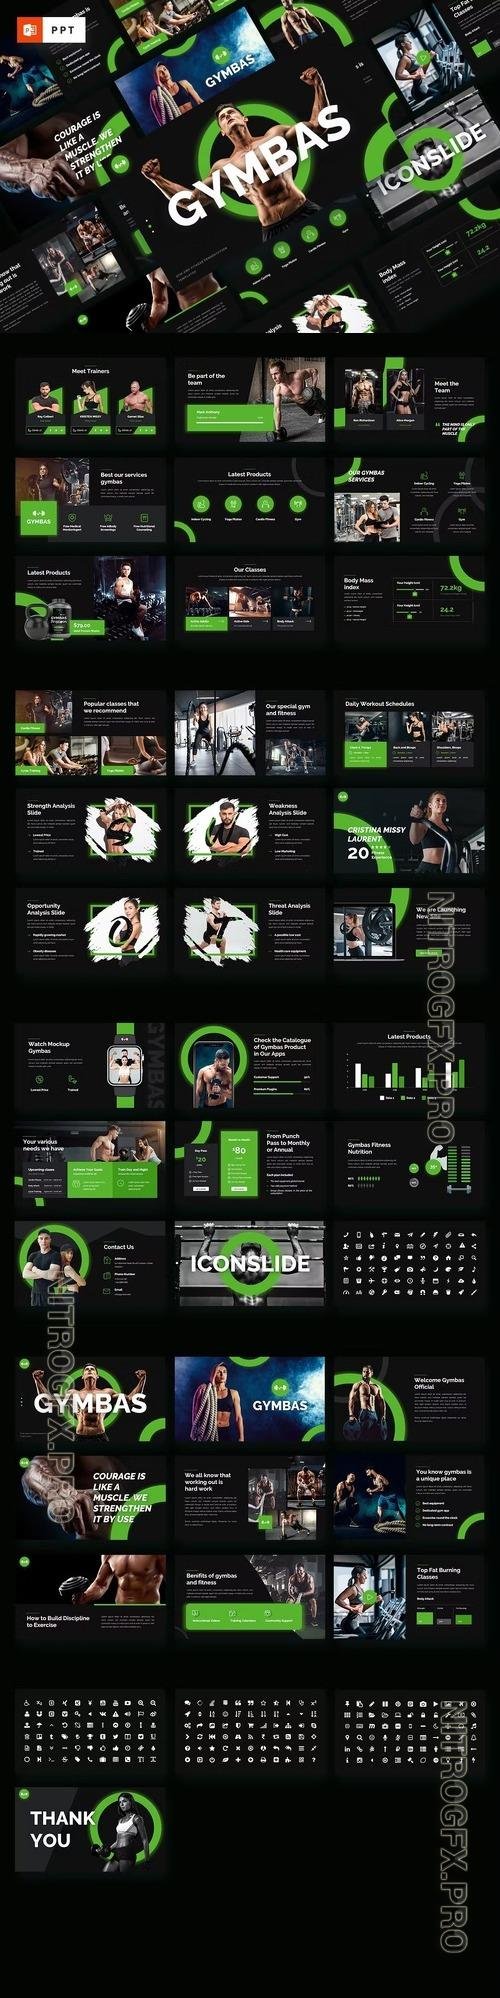 GYMBAS - GYM & Fitness Powerpoint Template